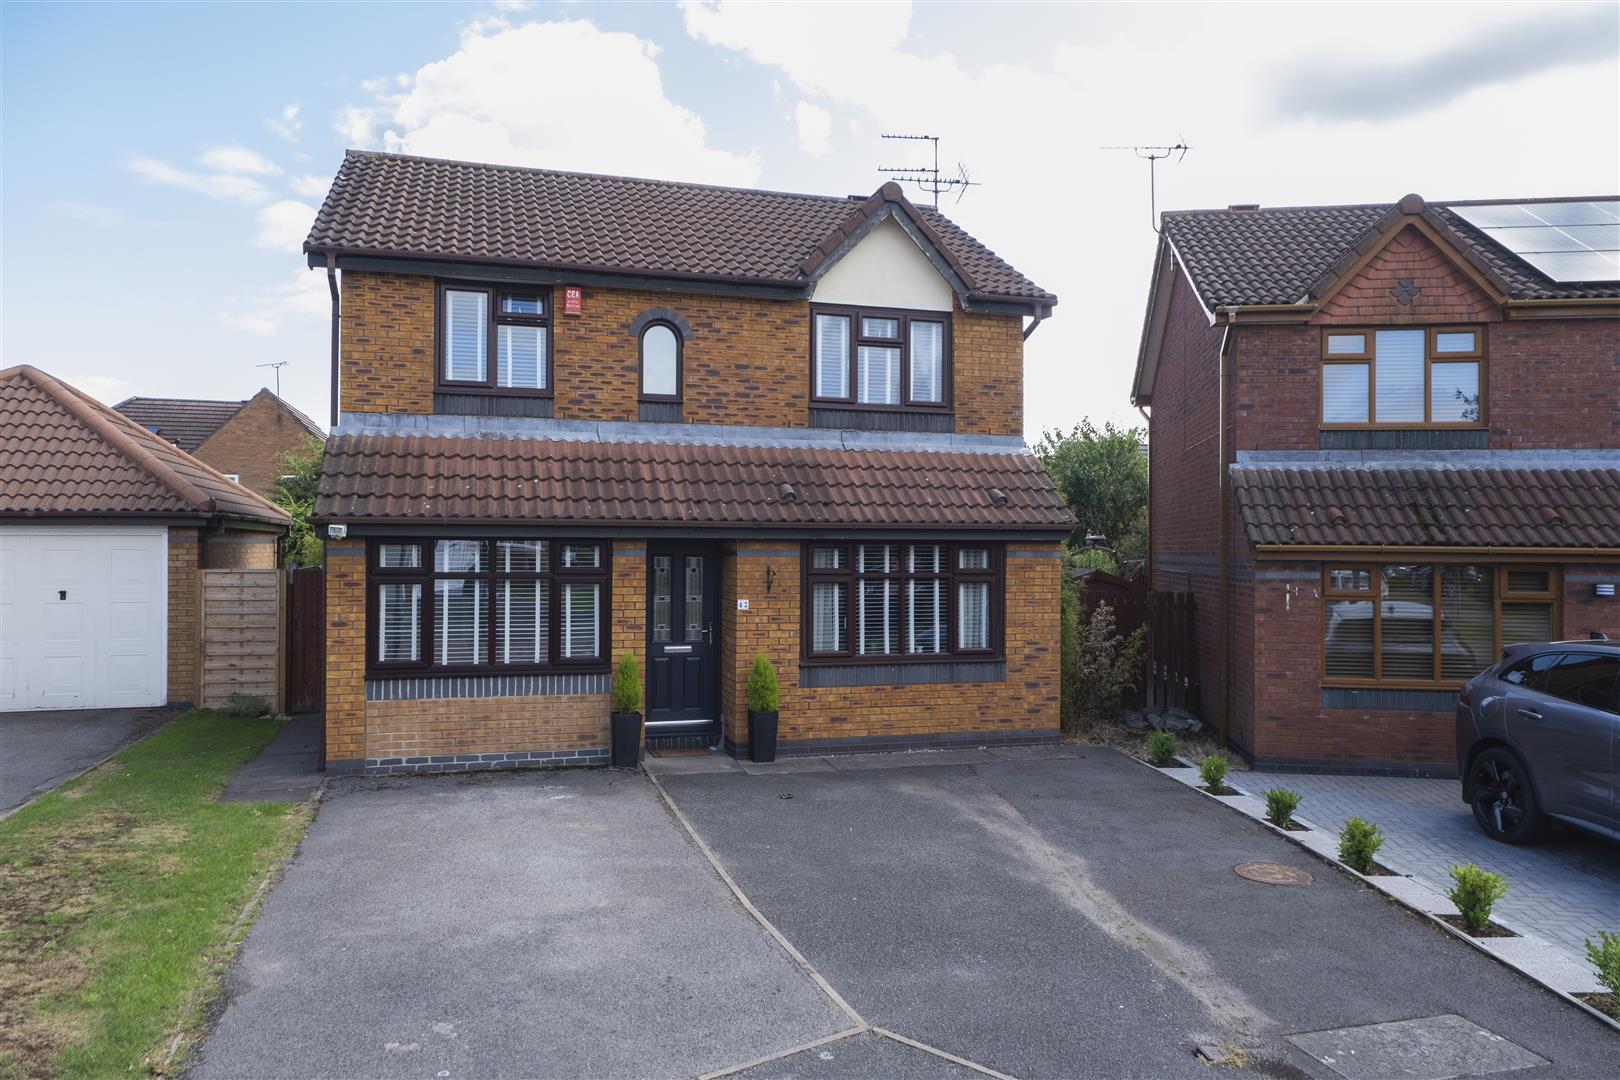 3 bedroom  Detached House for Sale in Sandbach